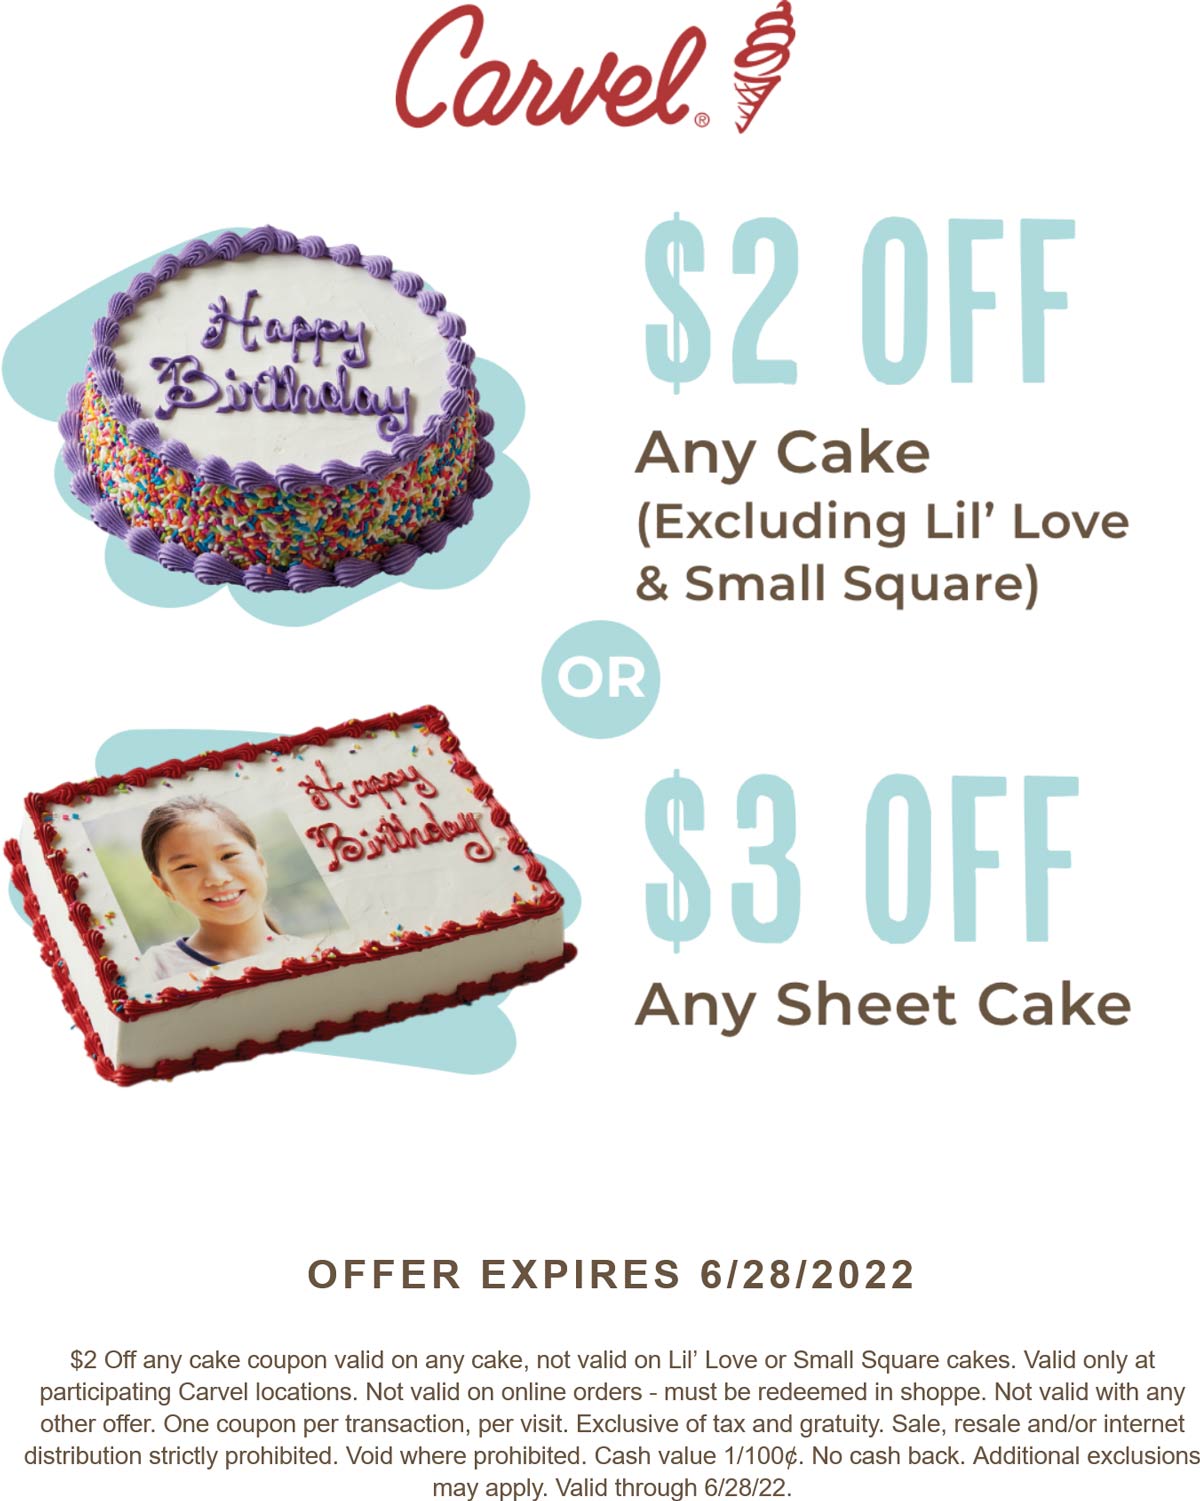 Carvel restaurants Coupon  $2-$3 off any ice cream cake at Carvel #carvel 